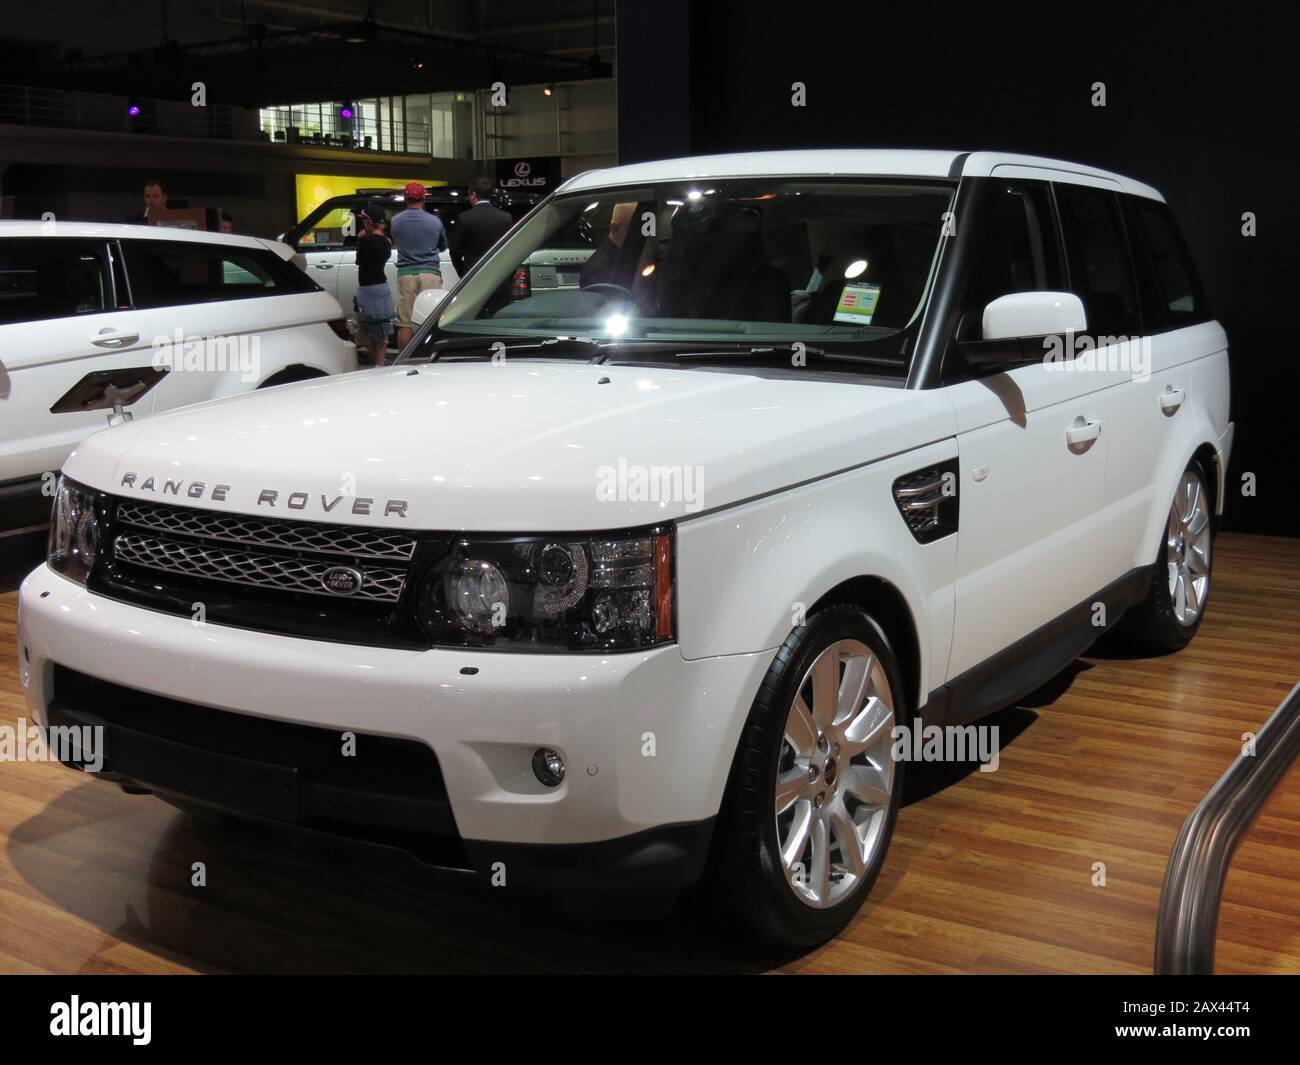 English: 2012 Land Rover Range Rover Sport (L320 13MY) SDV6 HSE Luxury  wagon. Photographed at the 2012 Australian International Motor Show,  Sydney, New South Wales, Australia.; 26 October 2012; Own work; OSX Stock  Photo - Alamy